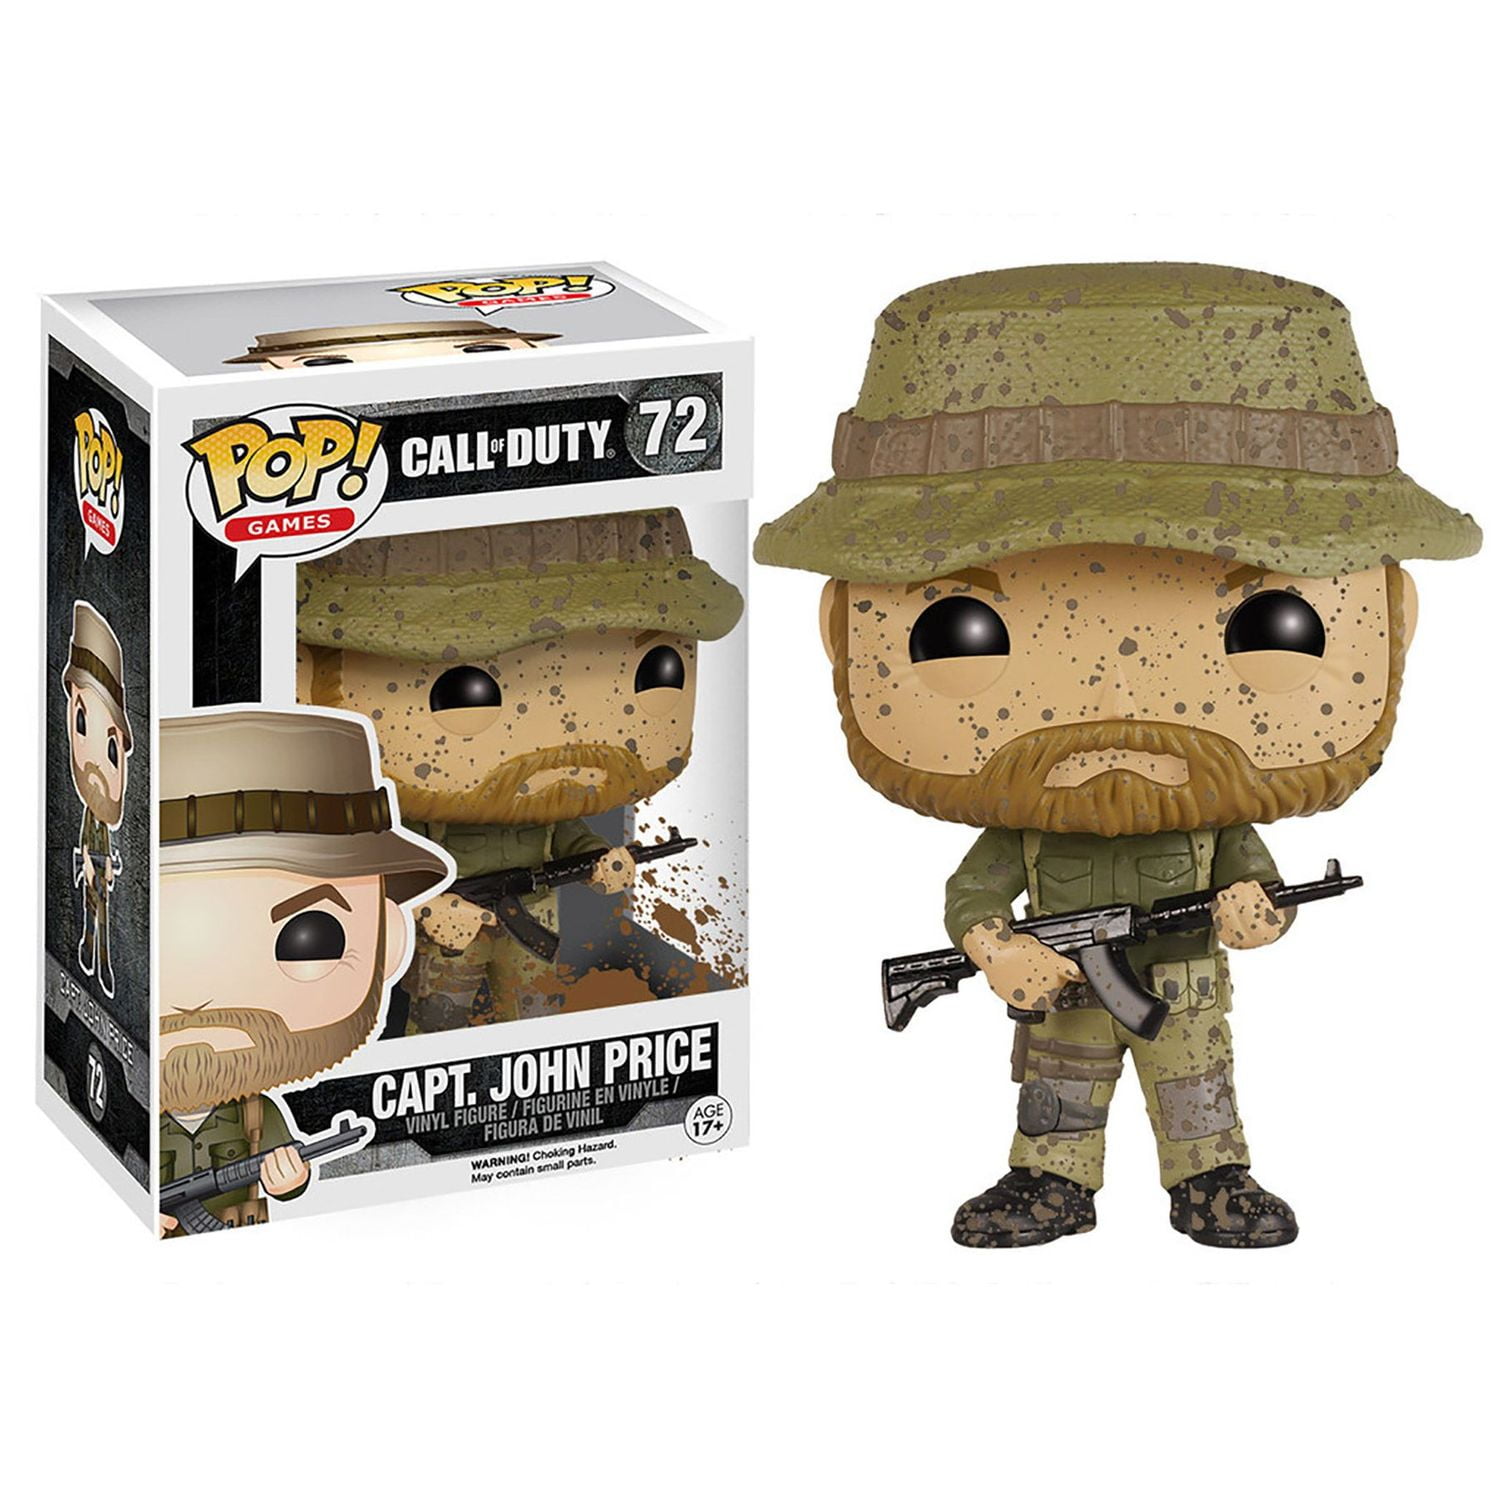 1 FREE Video Games Themed Trading Card Bundle Target Exclusive : Funko POP BCC9470E1 118552 Spaceland Zombie x Call of Duty Vinyl Figure